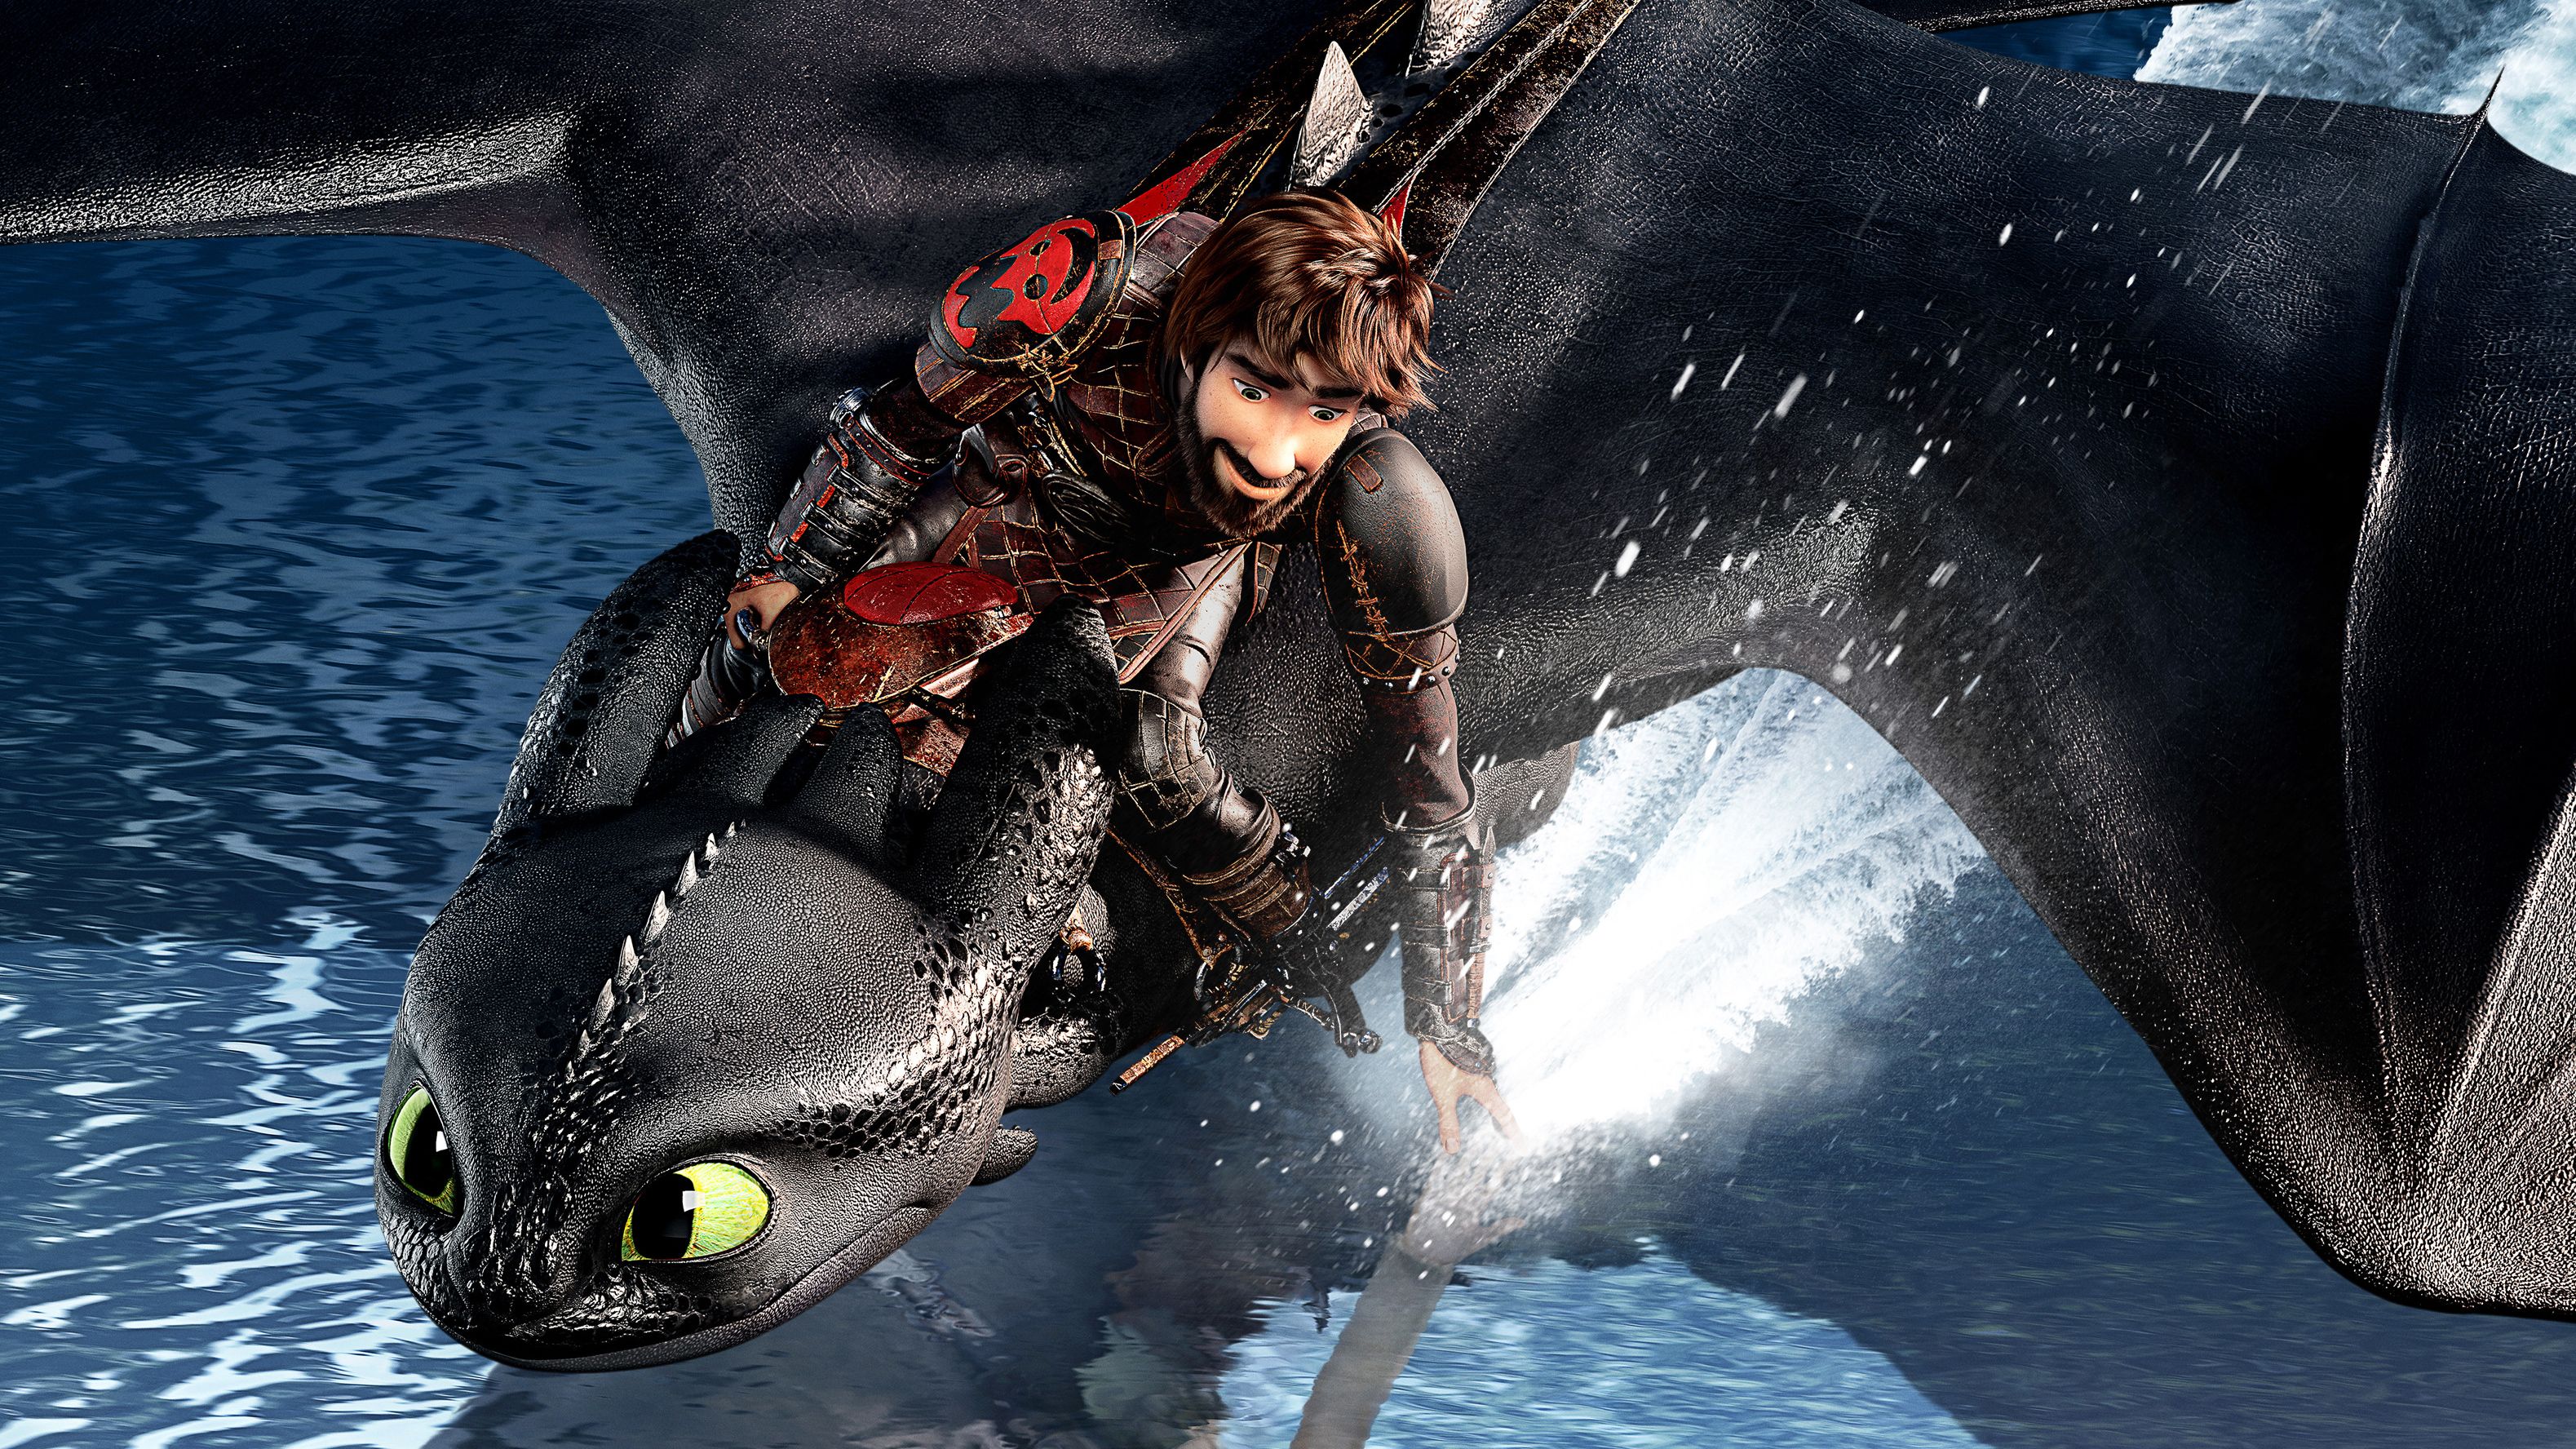 How To Train Your Dragon The Hidden World HD Movies, 4k